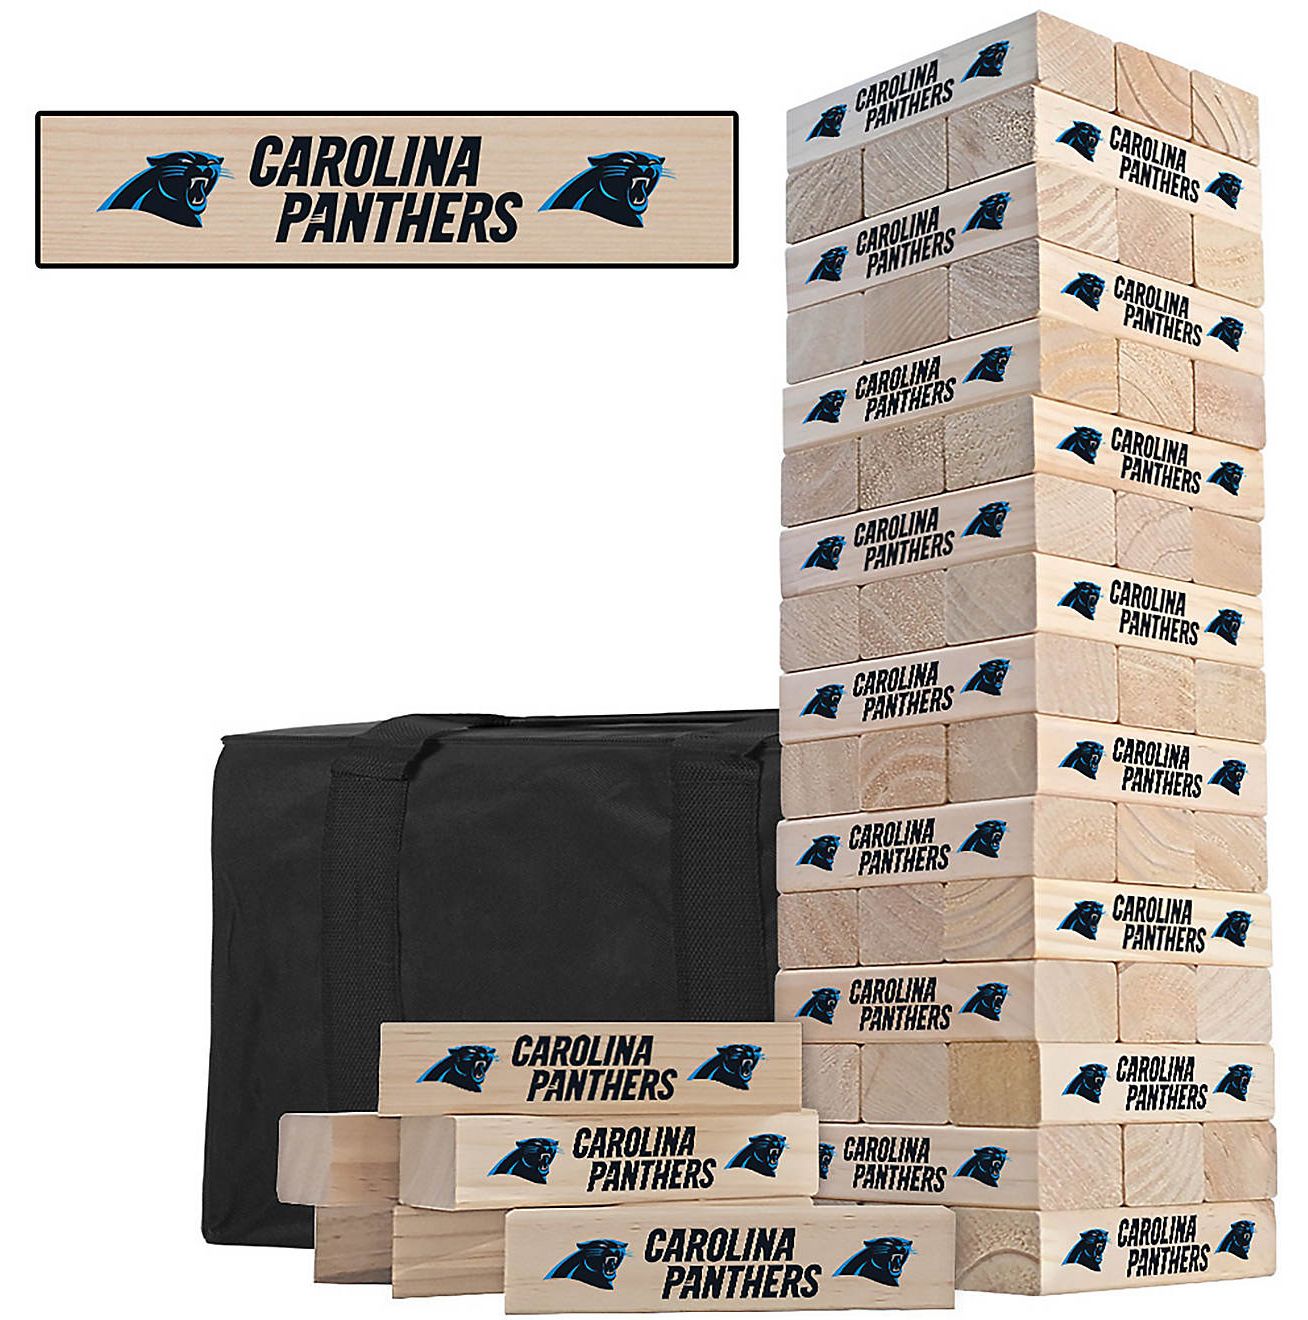 Prime Day NFL gifts: Holiday gifts for fans of every NFL team